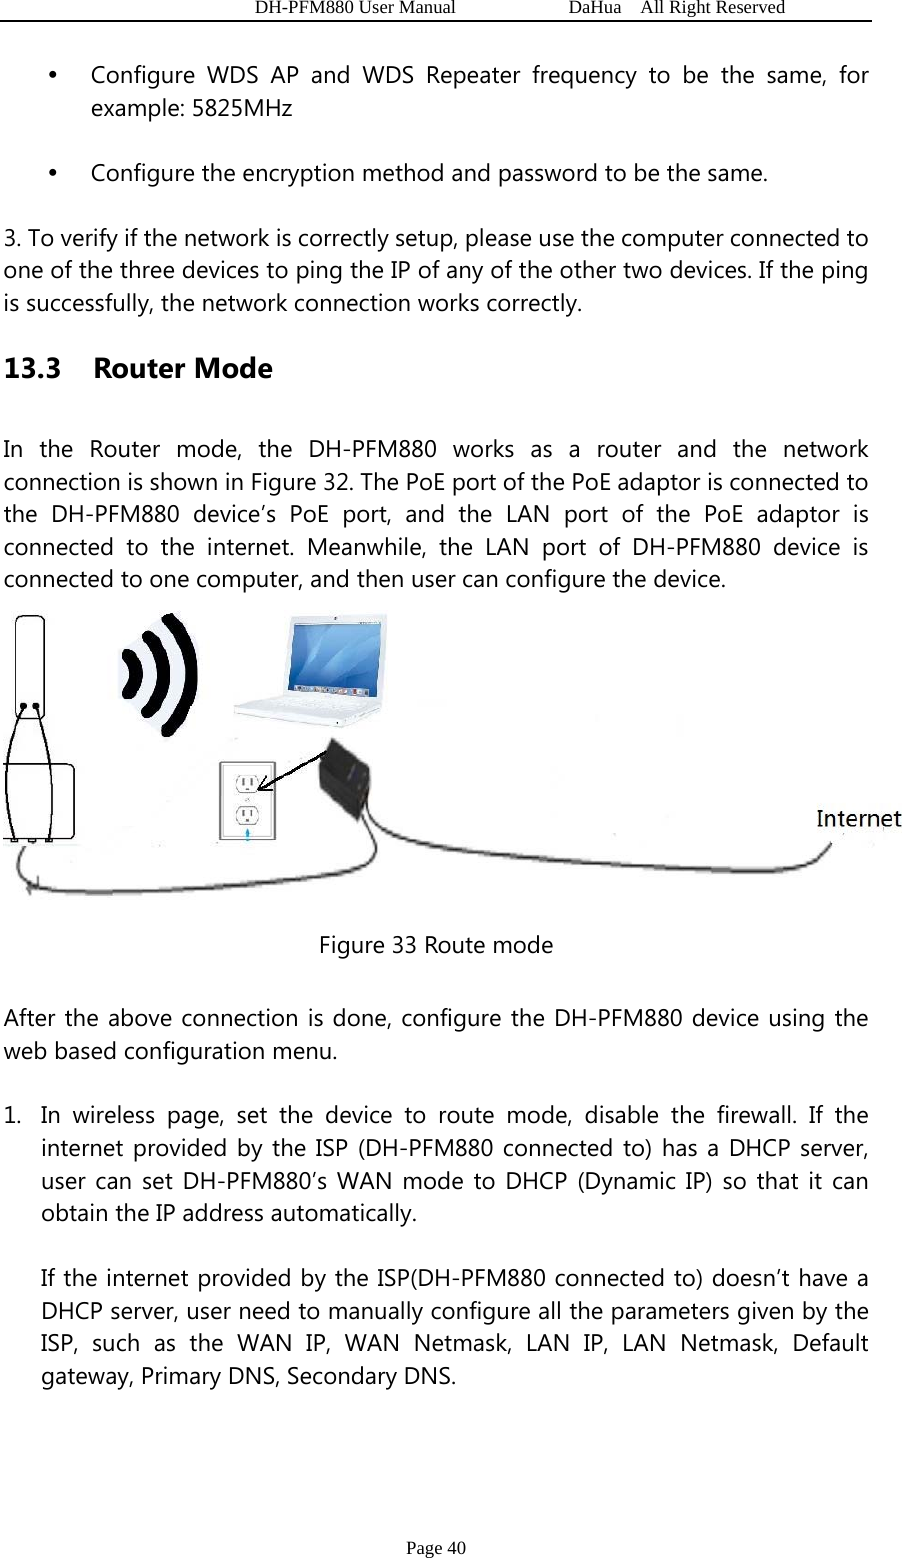   DH-PFM880 User Manual            DaHua  All Right Reserved Page 40 y Configure WDS AP and WDS Repeater frequency to be the same, for example: 5825MHz y Configure the encryption method and password to be the same. 3. To verify if the network is correctly setup, please use the computer connected to one of the three devices to ping the IP of any of the other two devices. If the ping is successfully, the network connection works correctly. 13.3  Router Mode In the Router mode, the DH-PFM880 works as a router and the network connection is shown in Figure 32. The PoE port of the PoE adaptor is connected to the DH-PFM880 device’s PoE port, and the LAN port of the PoE adaptor is connected to the internet. Meanwhile, the LAN port of DH-PFM880 device is connected to one computer, and then user can configure the device.  Figure 33 Route mode After the above connection is done, configure the DH-PFM880 device using the web based configuration menu. 1. In wireless page, set the device to route mode, disable the firewall. If the internet provided by the ISP (DH-PFM880 connected to) has a DHCP server, user can set DH-PFM880’s WAN mode to DHCP (Dynamic IP) so that it can obtain the IP address automatically. If the internet provided by the ISP(DH-PFM880 connected to) doesn’t have a DHCP server, user need to manually configure all the parameters given by the ISP, such as the WAN IP, WAN Netmask, LAN IP, LAN Netmask, Default gateway, Primary DNS, Secondary DNS. 